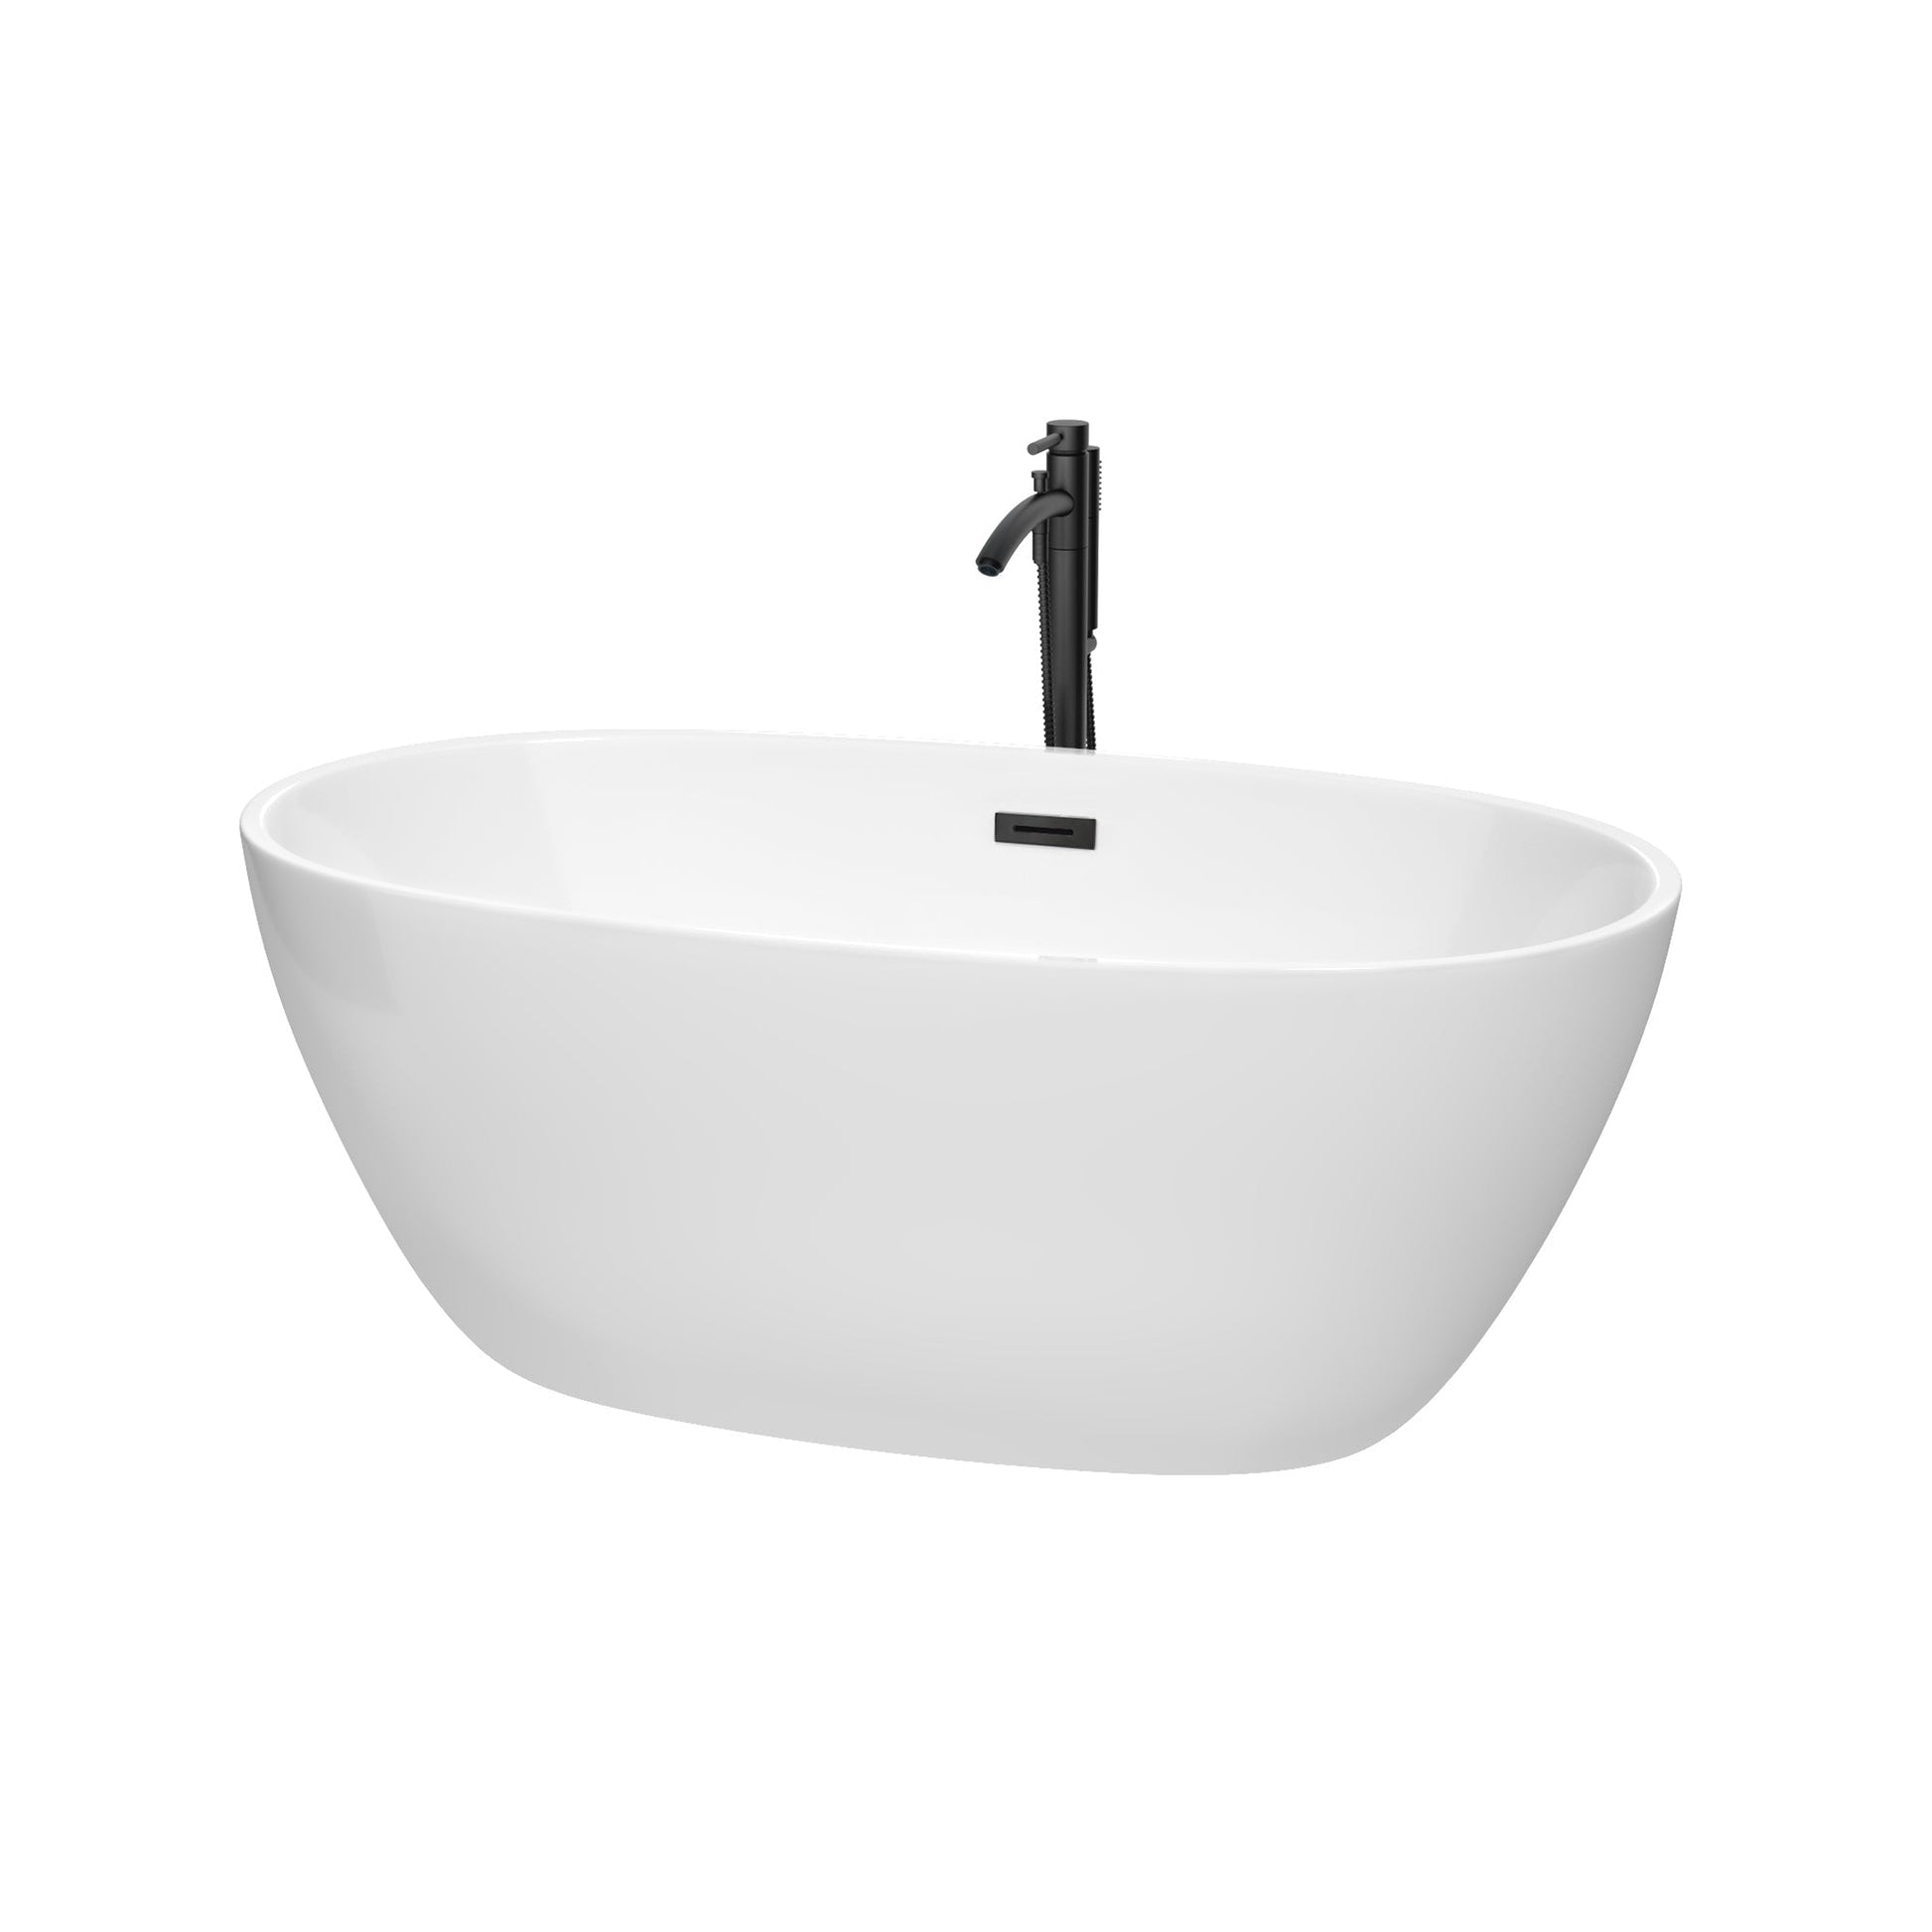 Wyndham Collection Juno 59" Freestanding Bathtub in White With Floor Mounted Faucet, Drain and Overflow Trim in Matte Black